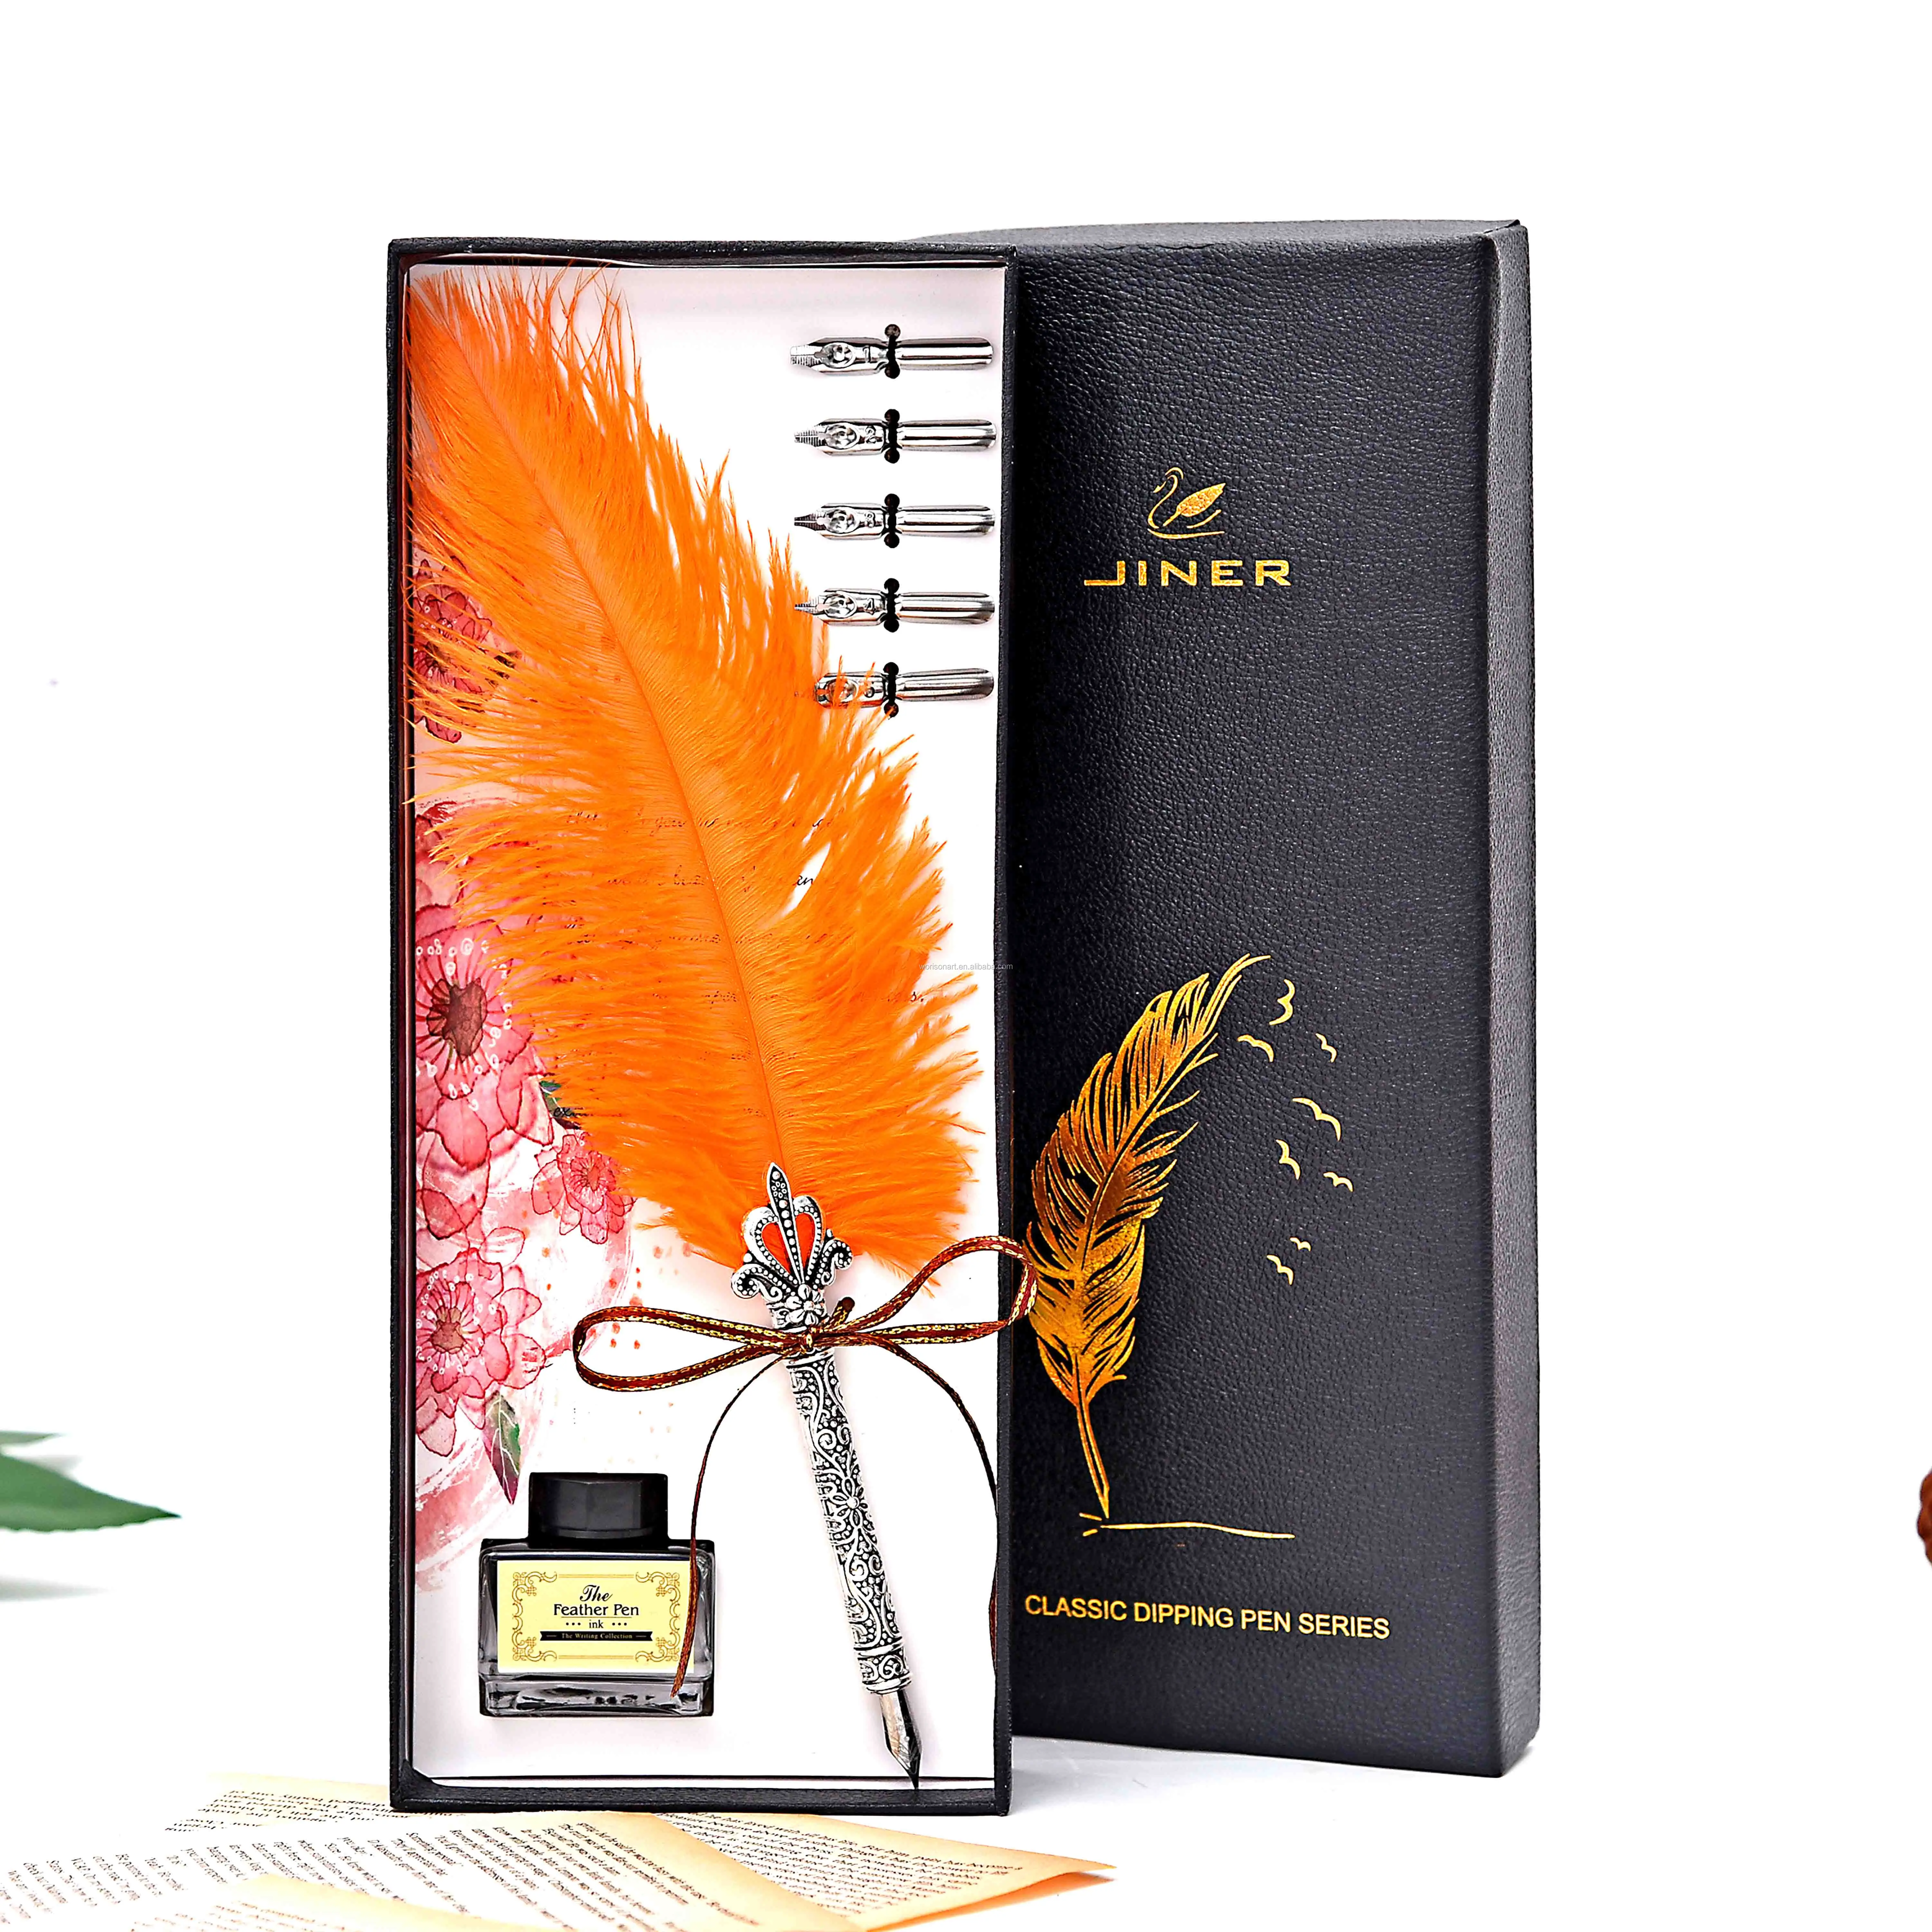 Calligraphy Pen Set Writting Quill Feather Pen 100% Hand Craft